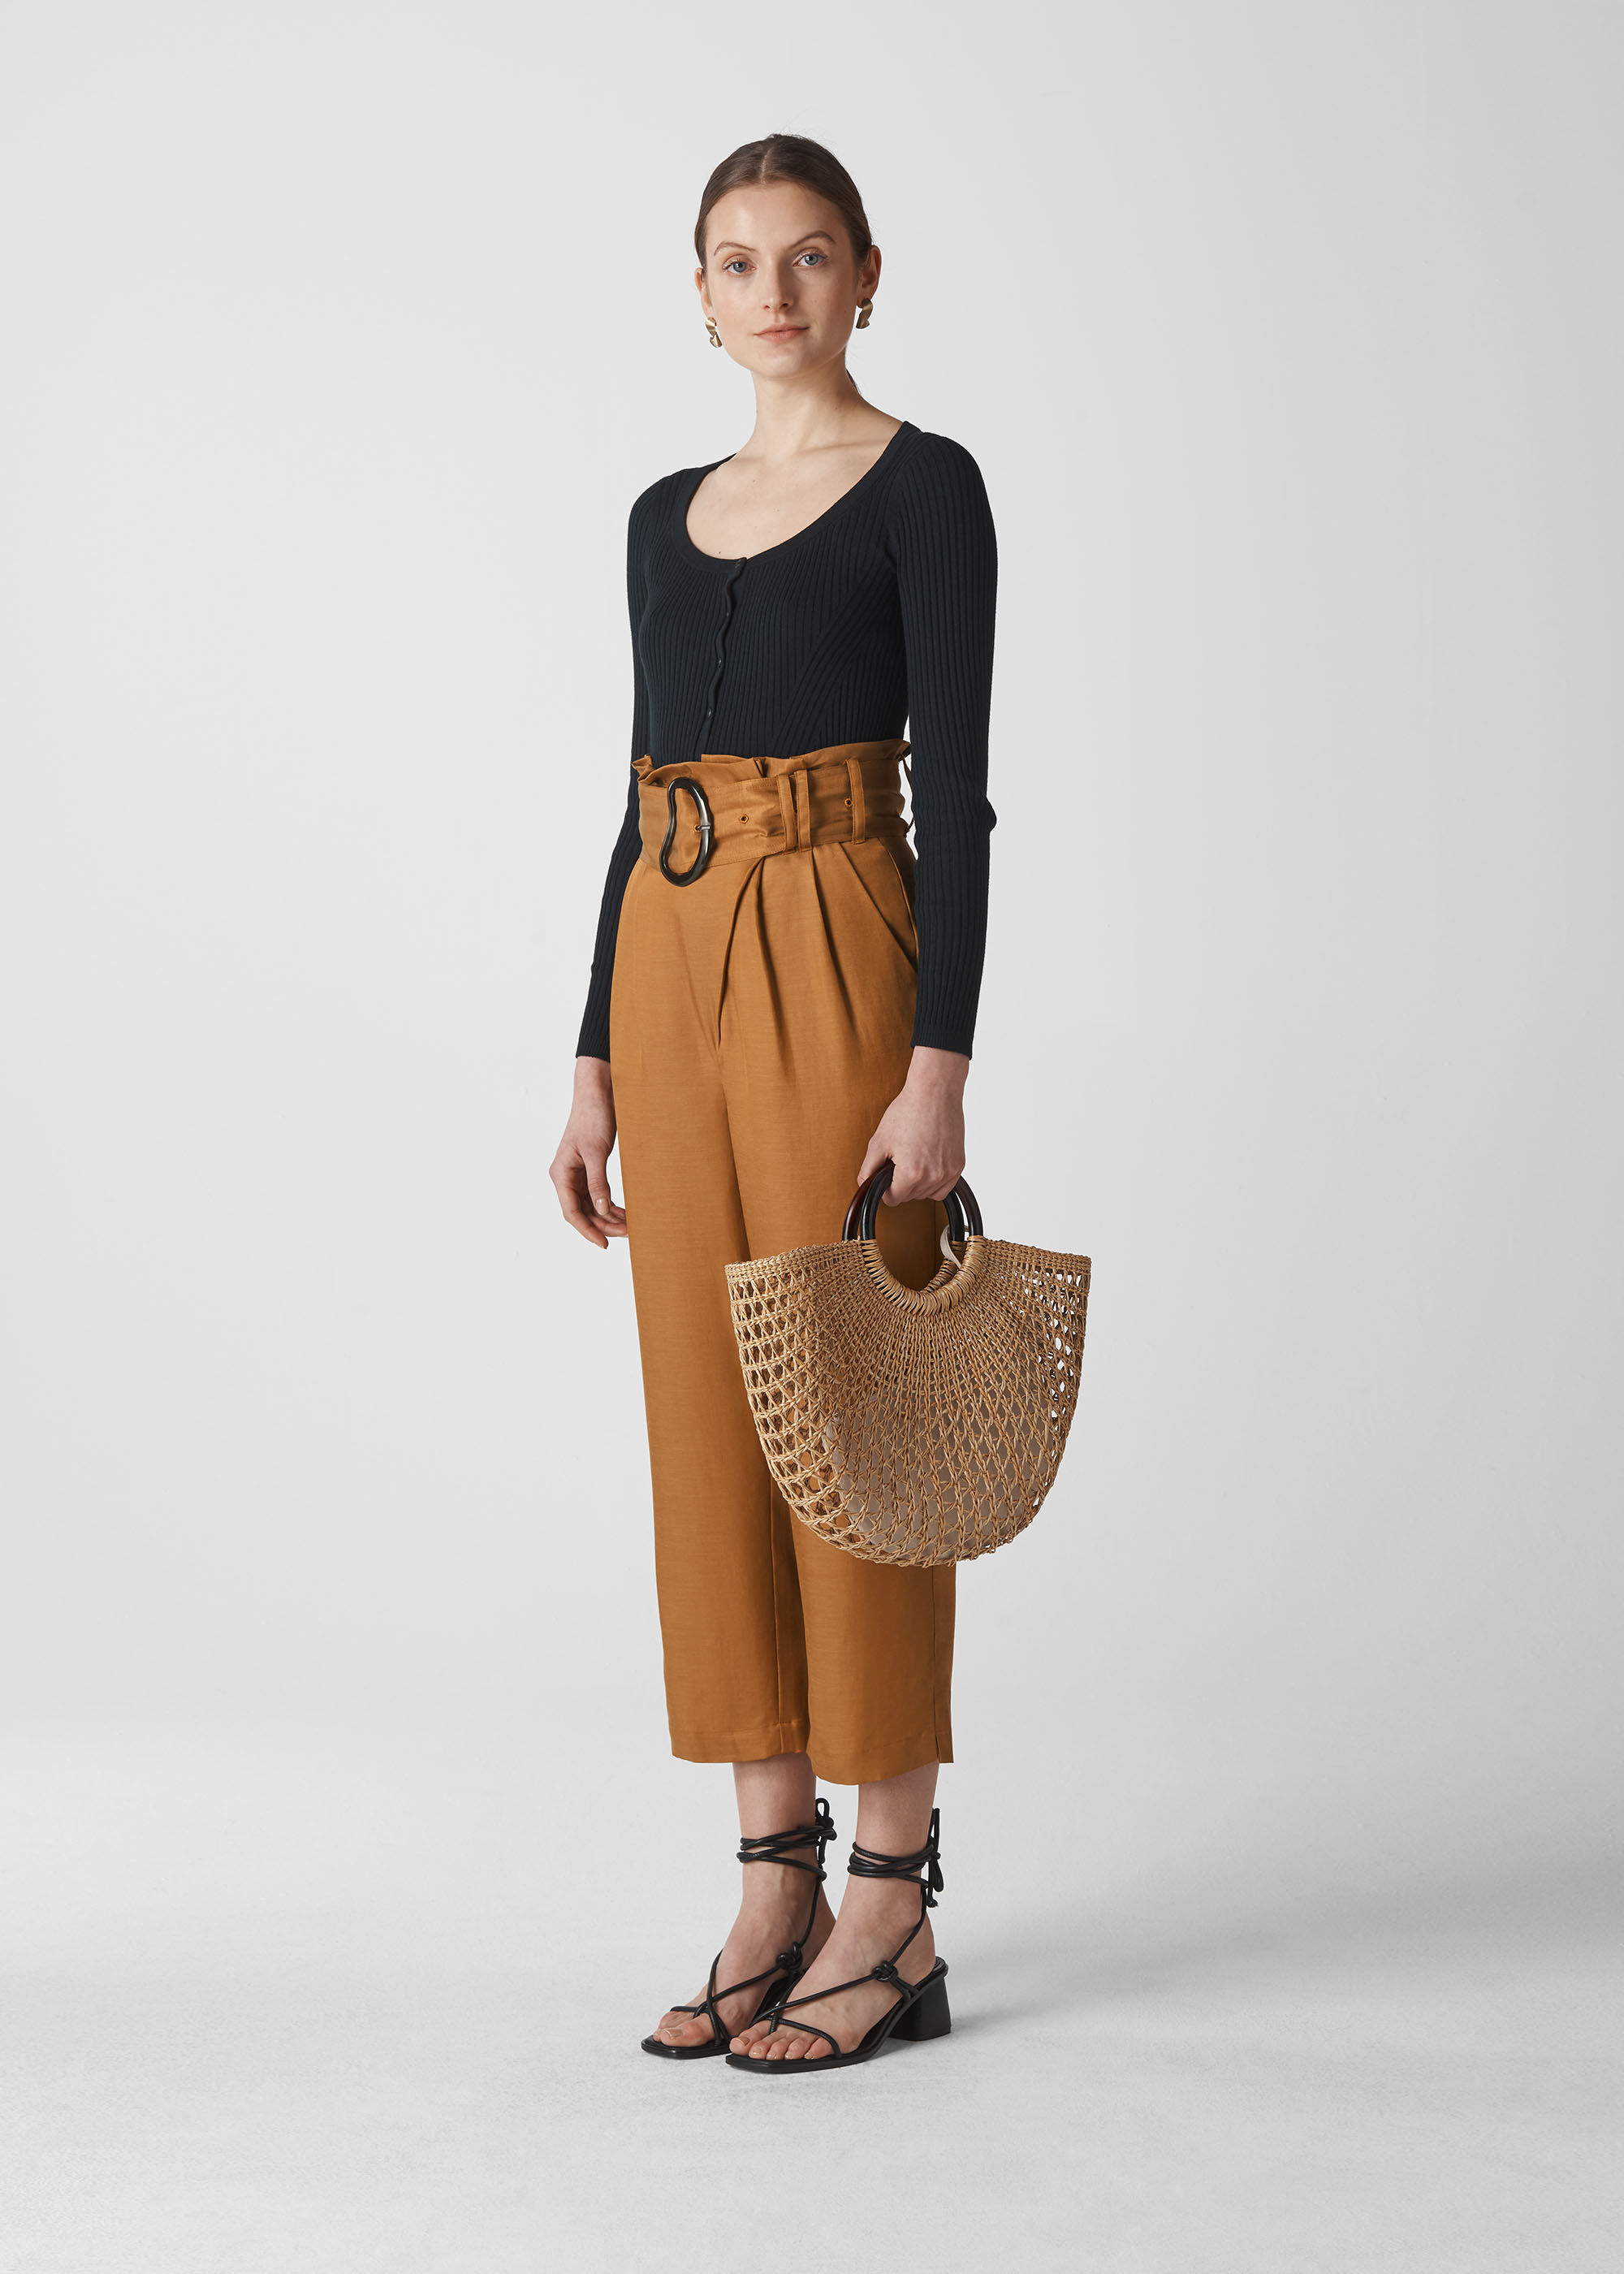 KAZO Bottoms Pants and Trousers  Buy KAZO Rust Paper Bag Pant With Belt  Online  Nykaa Fashion